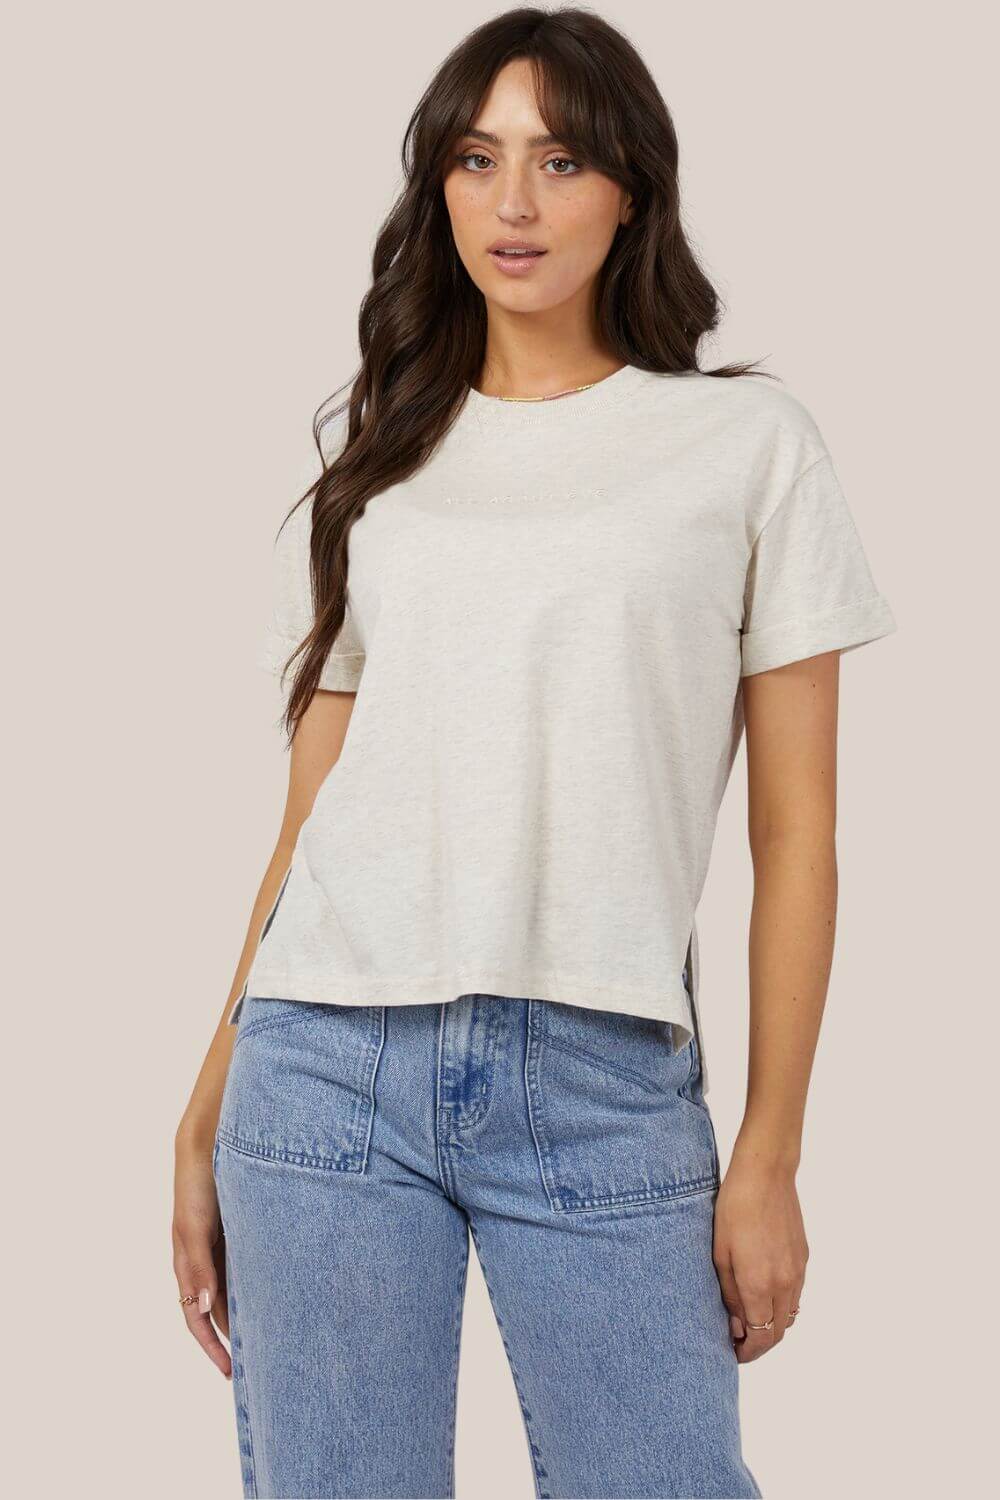 All About Eve AAE Washed Tee